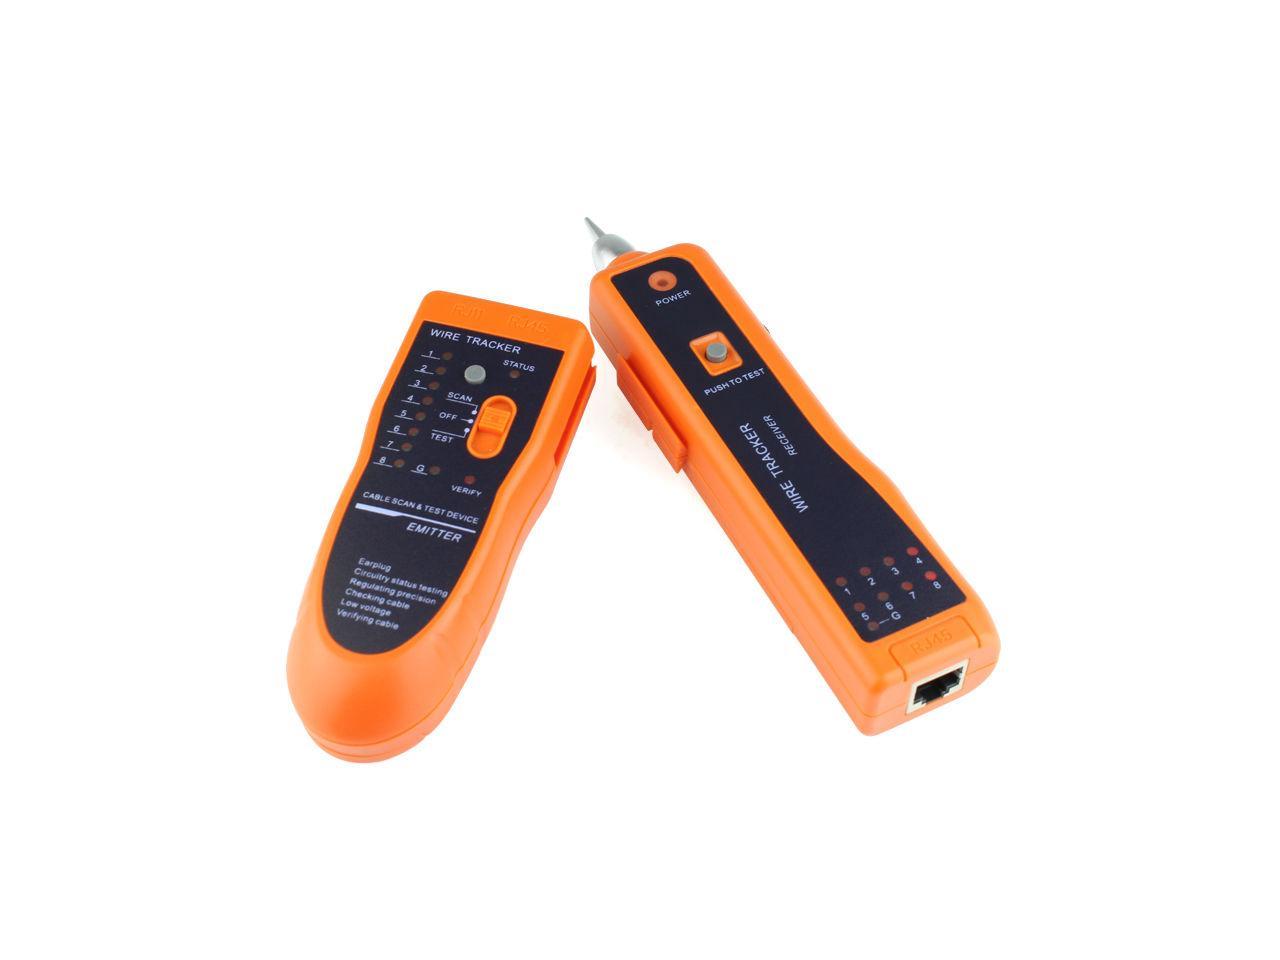 Details about   Cable Tester Wire Tracker Network Telephone Line Tracer Toner LAN RJ11 RJ45 